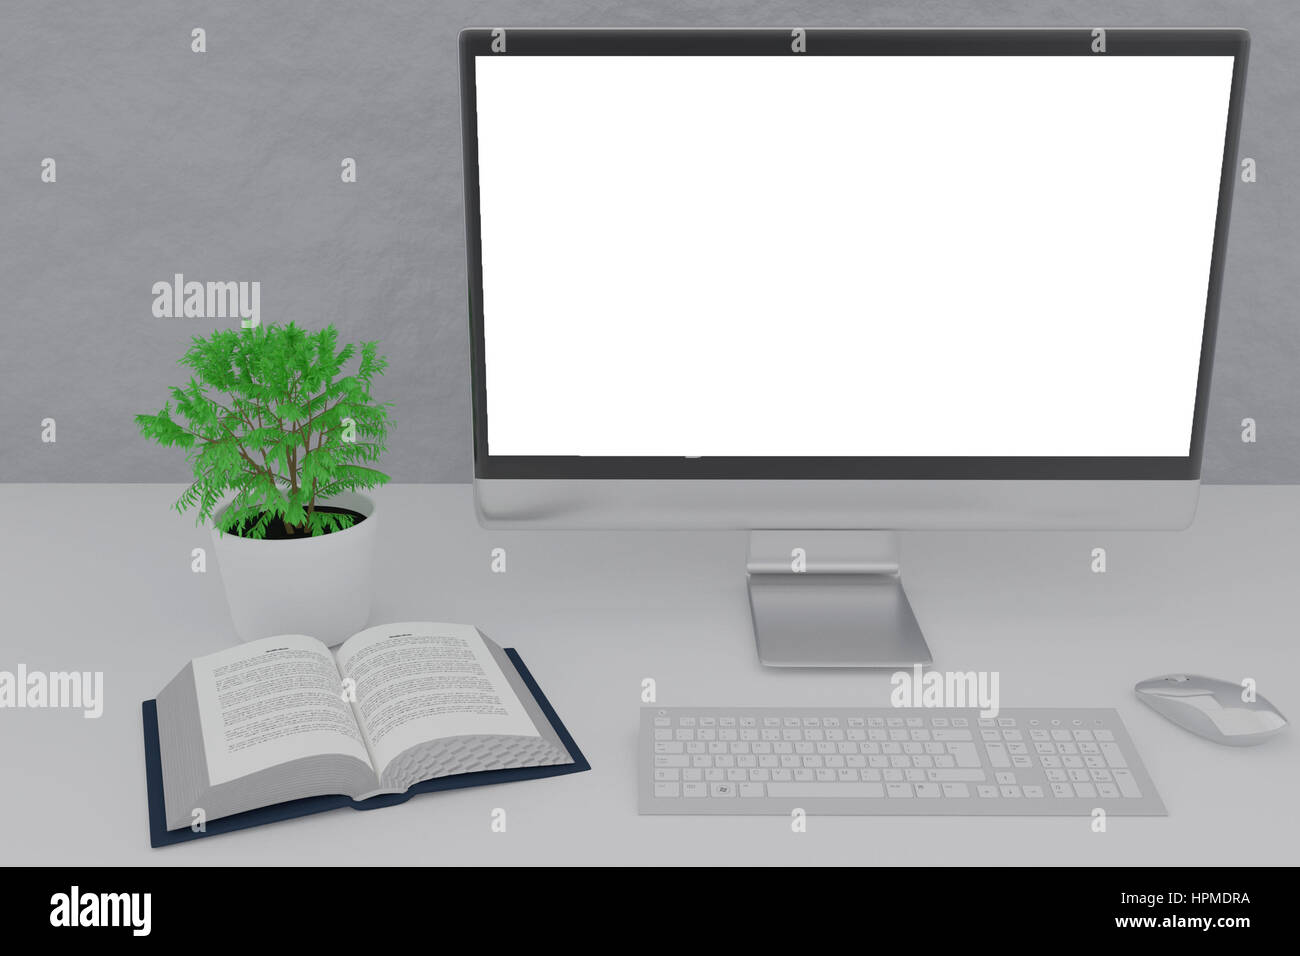 3D rendering of workspace with blank screen pc computer, keyboard with mouse, a small plant and a book, workspace Stock Photo